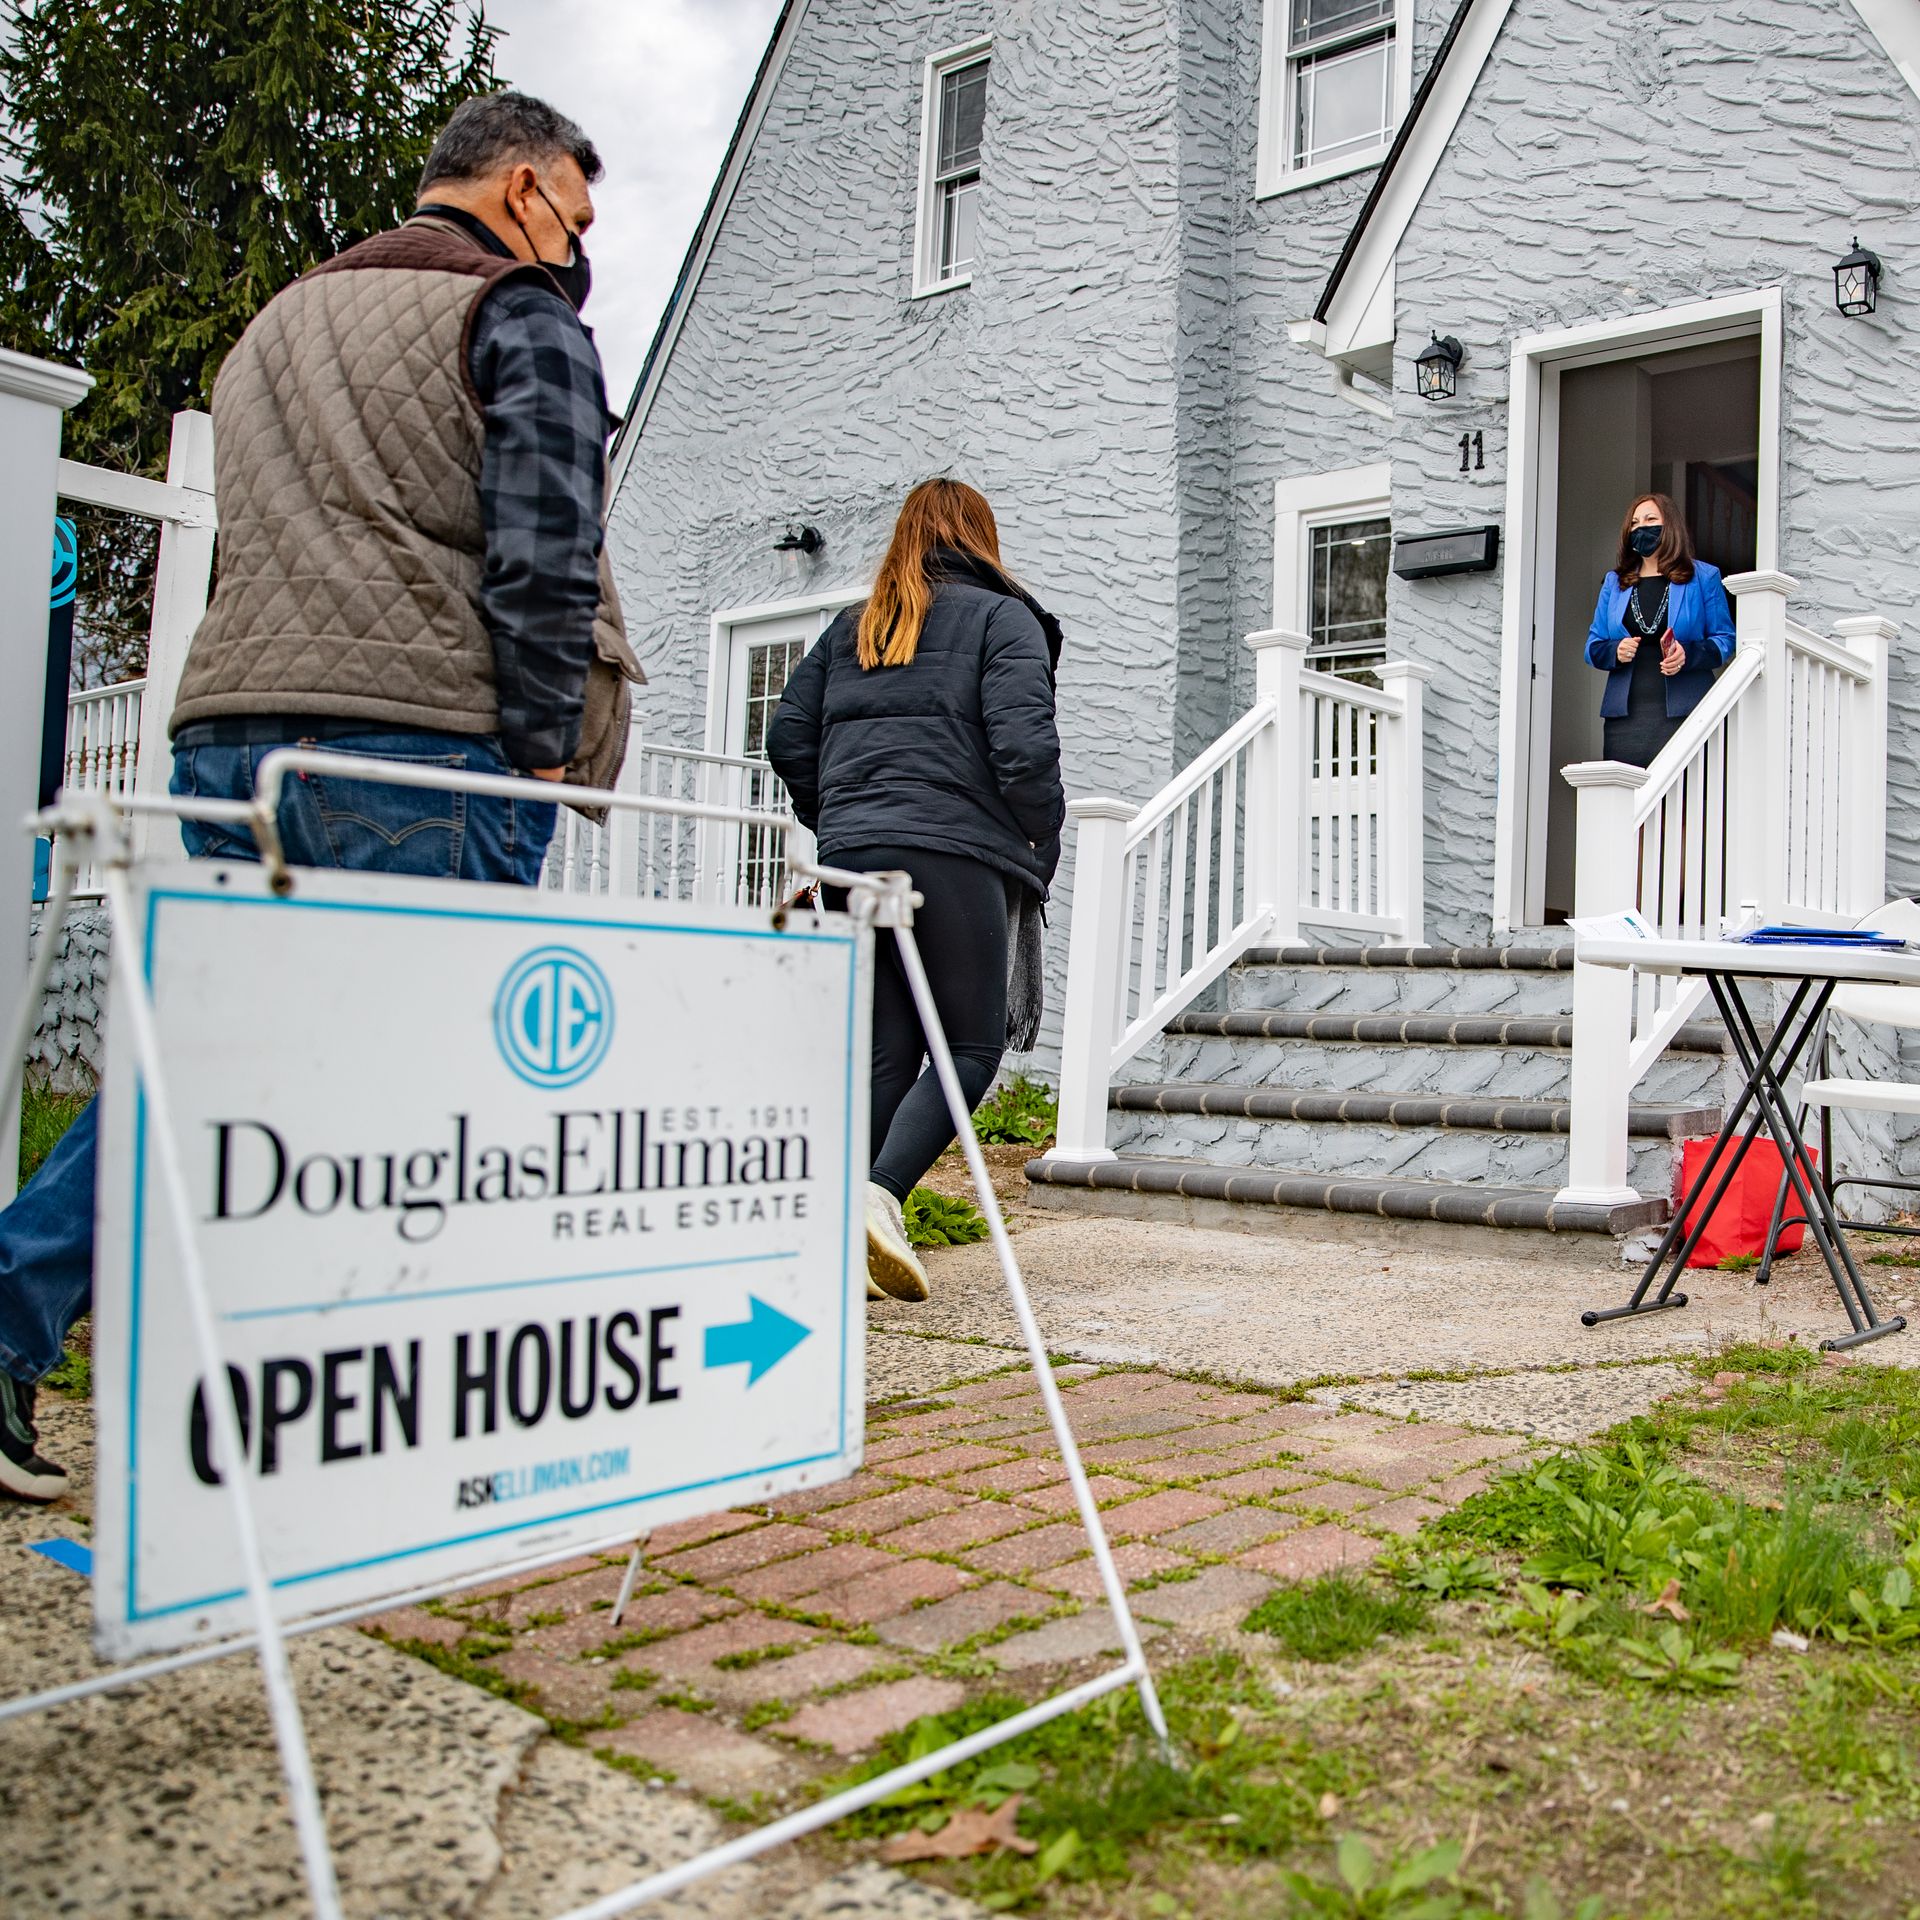 Image of people entering and existing an Open House for sale